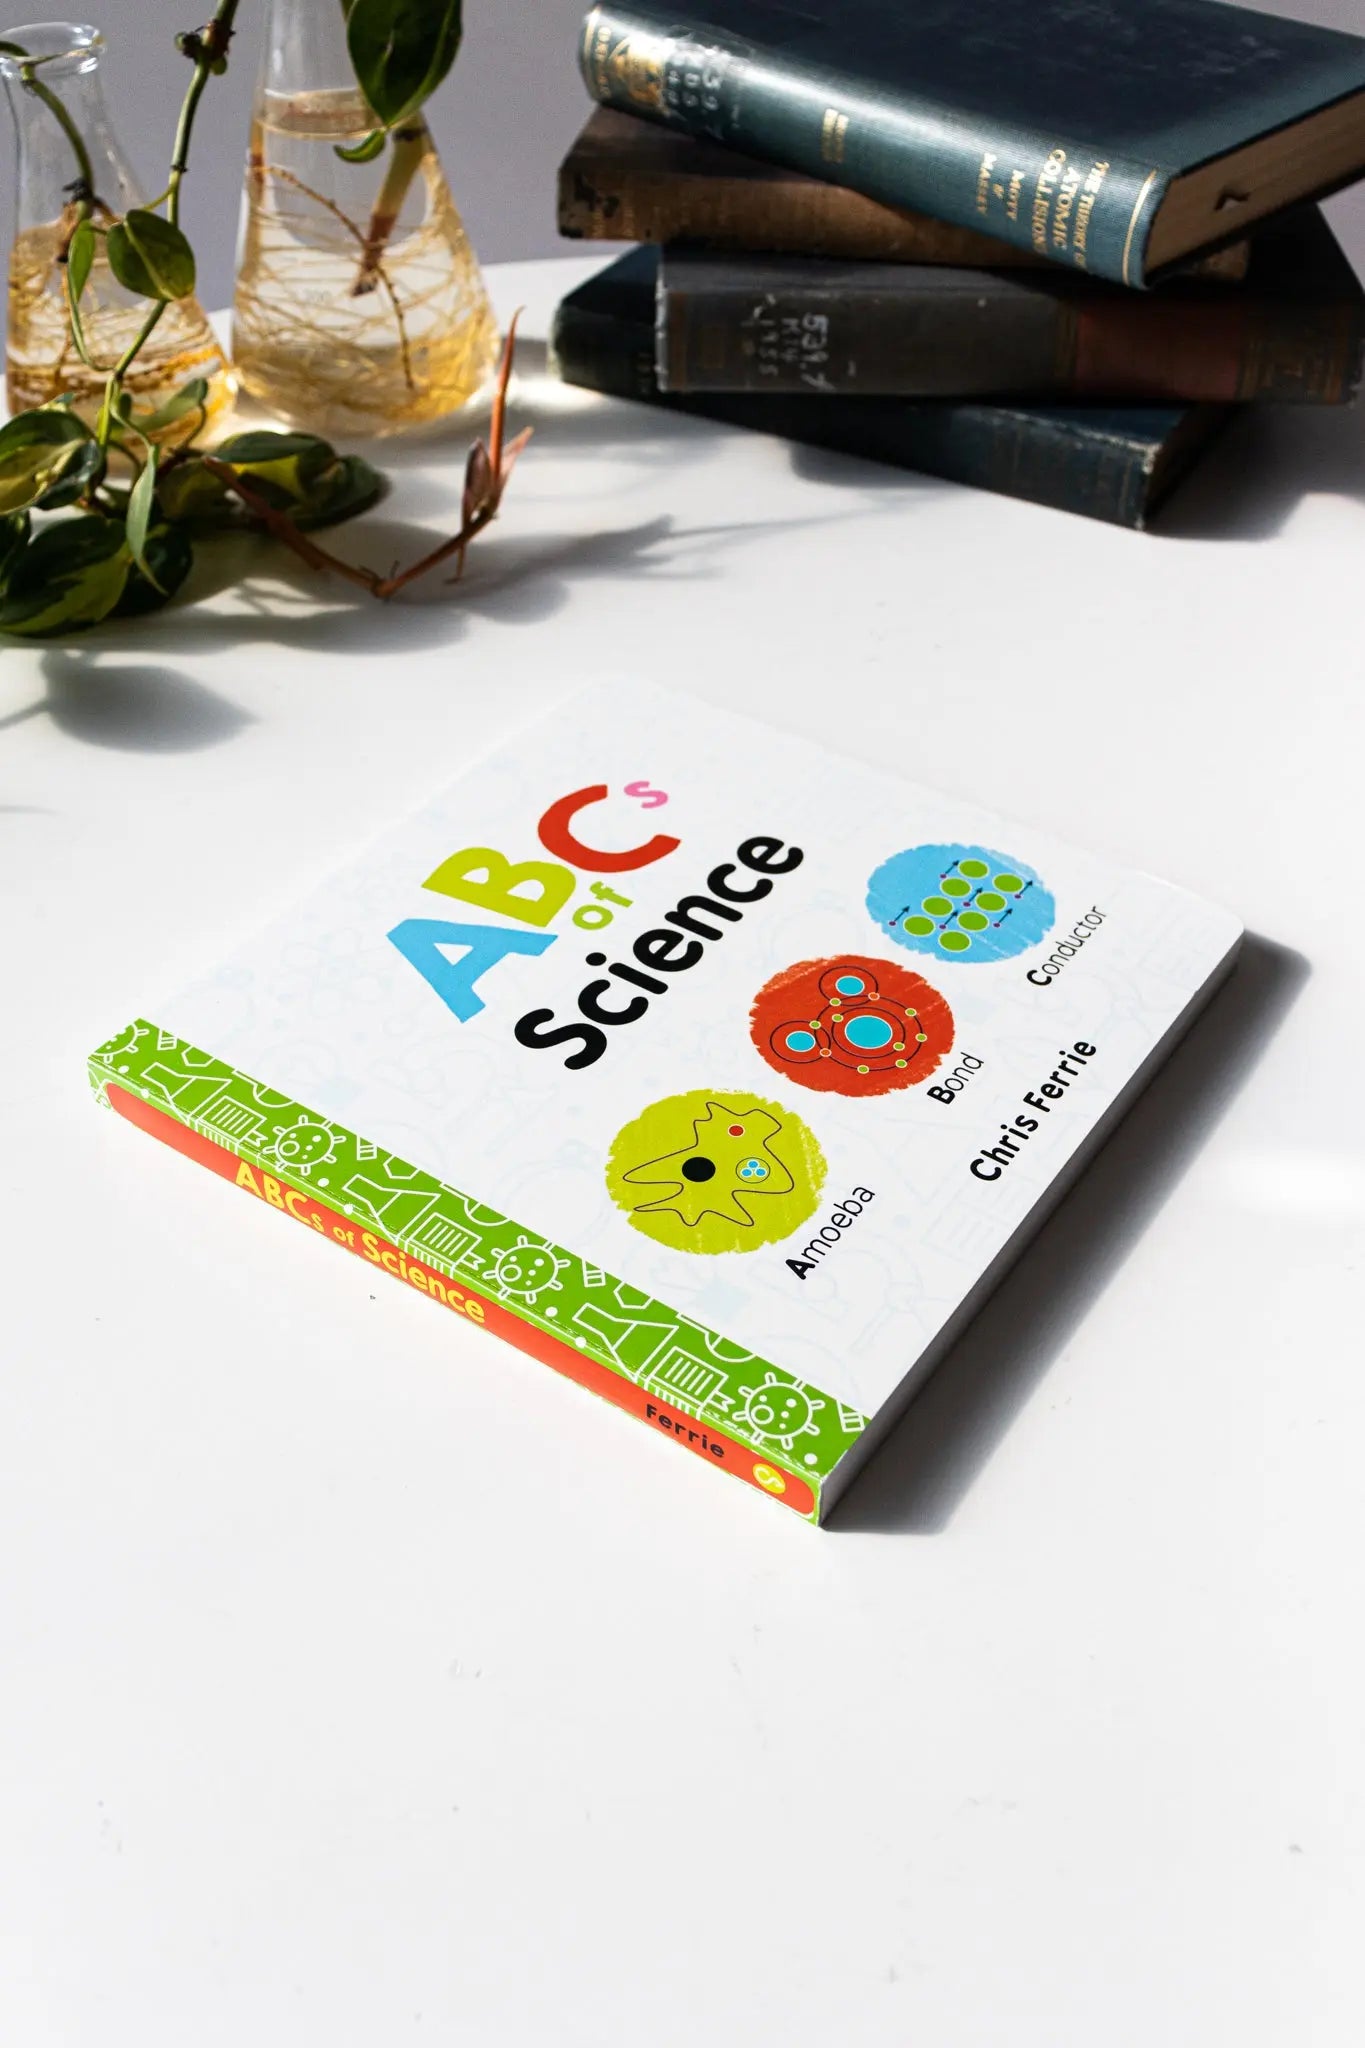 ABC's of Science - Stemcell Science Shop